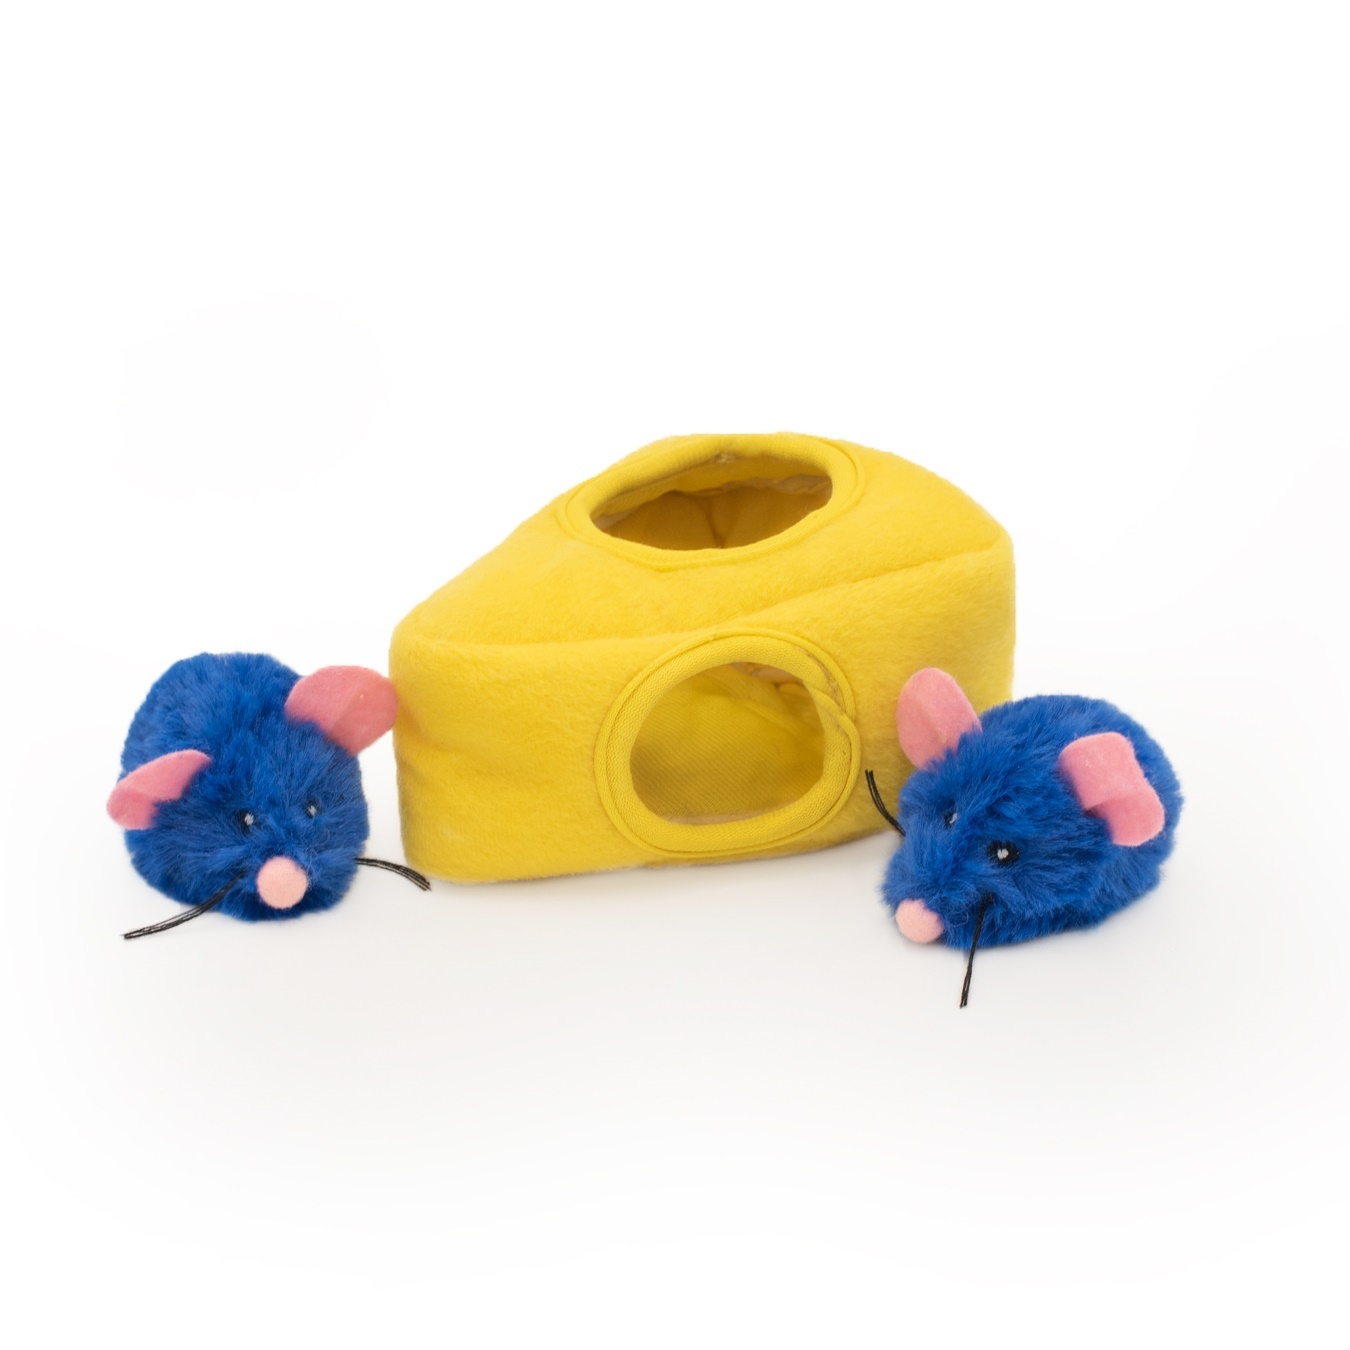 Zippy Paws ZippyClaws Burrow Cat Toy - Mice 'n Cheese  image 0